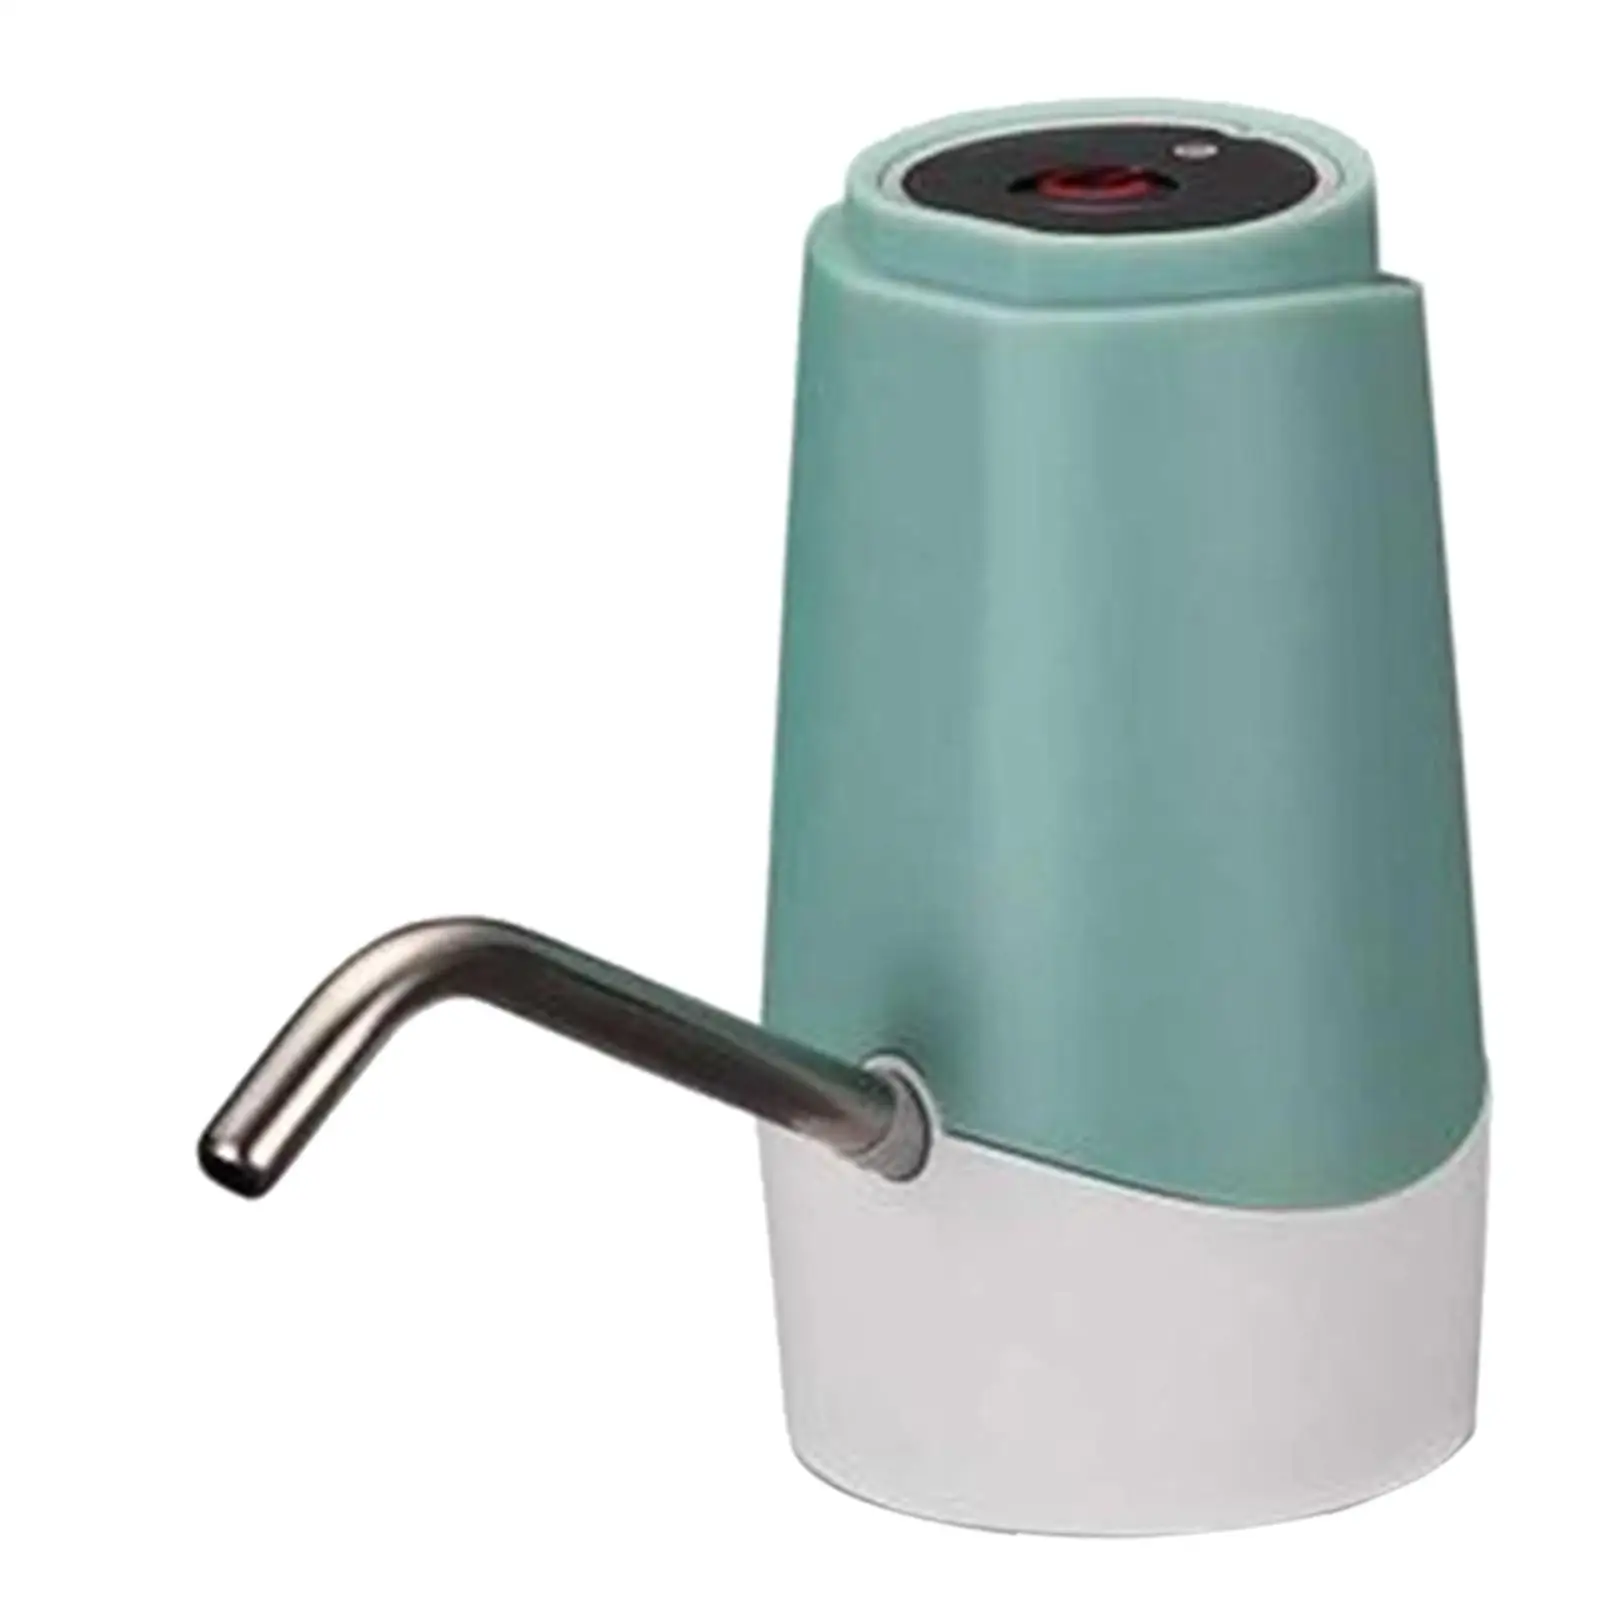 Automatic Water Dispenser, Portable Water Pump Electric pump Bottle Pump for Camping, Picnic, Office, Home, Hiking,